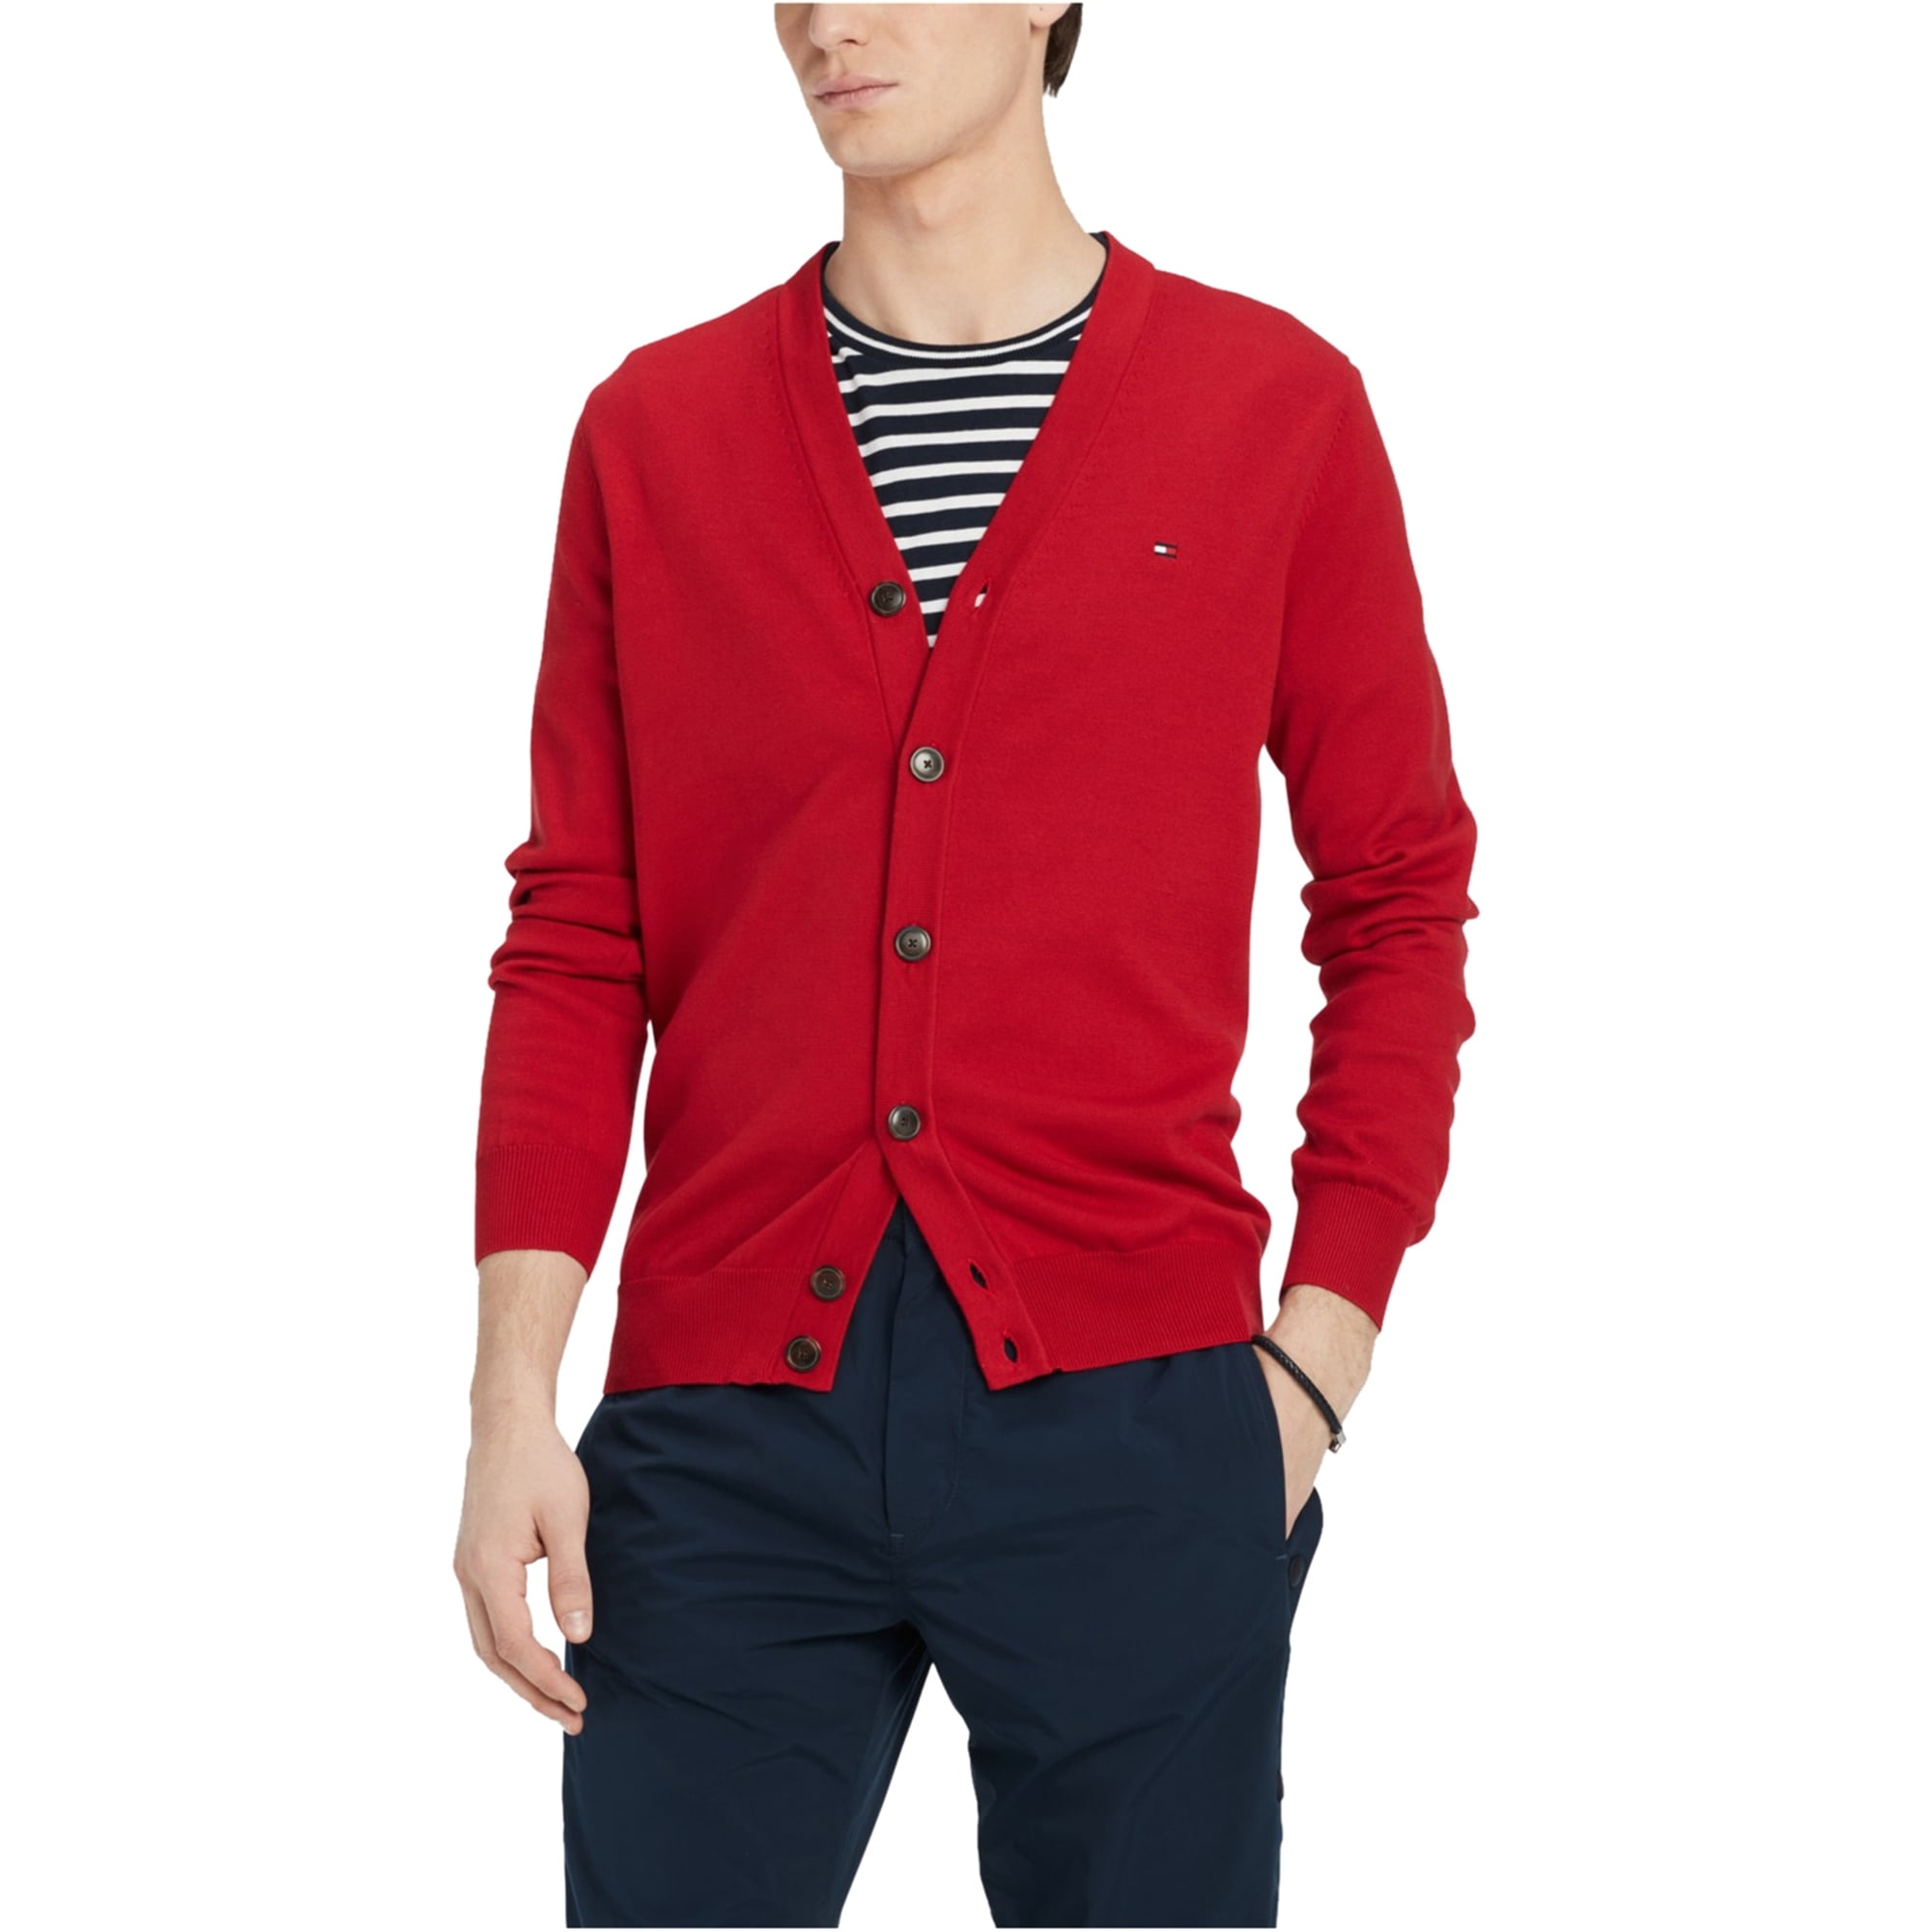 Tommy Hilfiger - Tommy Hilfiger Mens Button-Up Cardigan Sweater ...